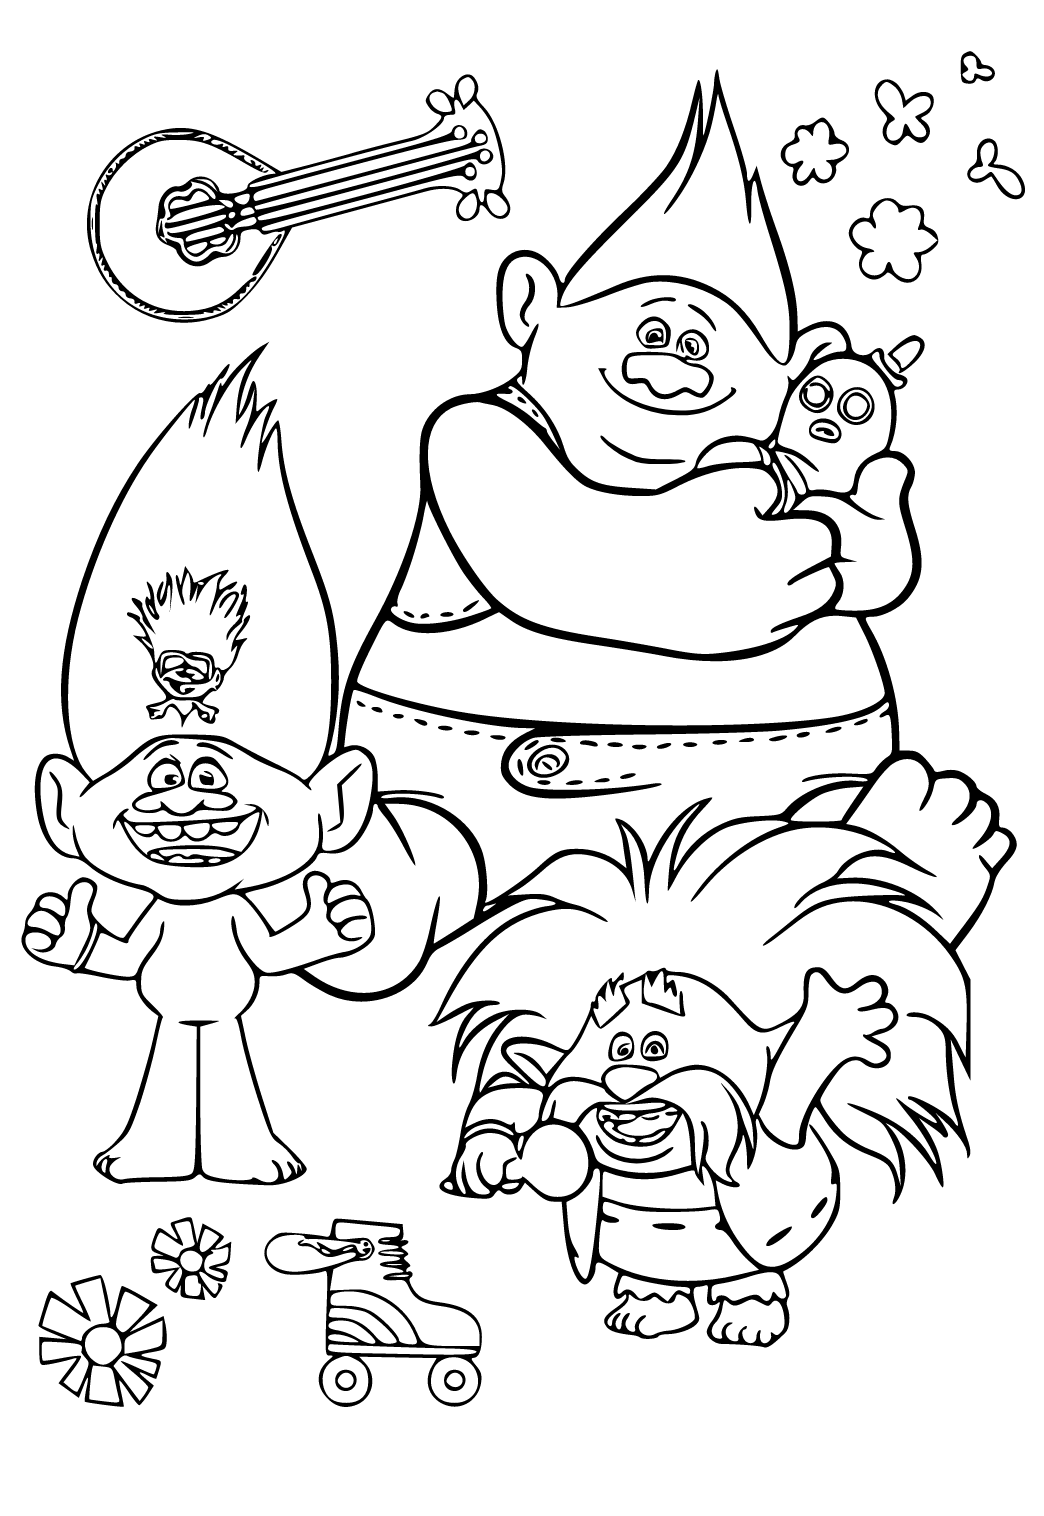 Free printable trolls world tour characters coloring page for adults and kids